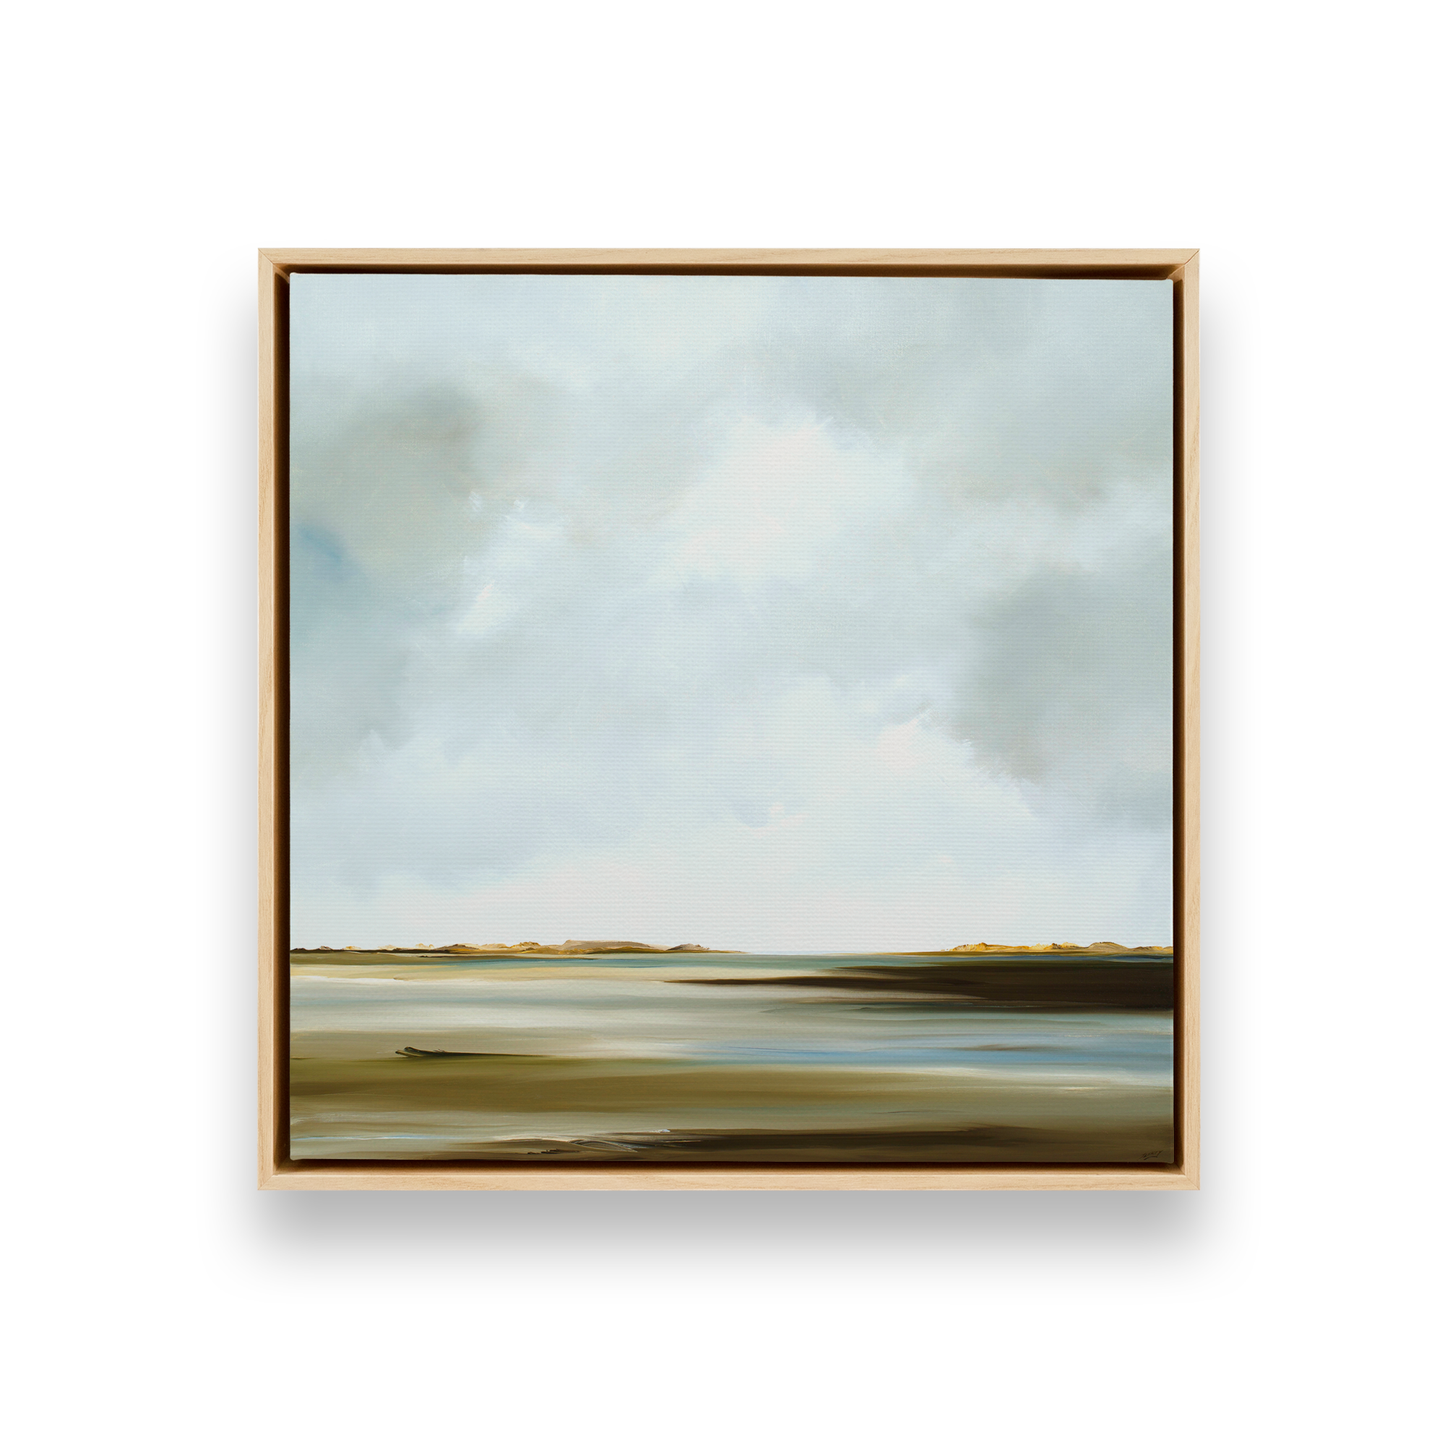 [color:American Maple],[shape:square], Picture of art in a black frame